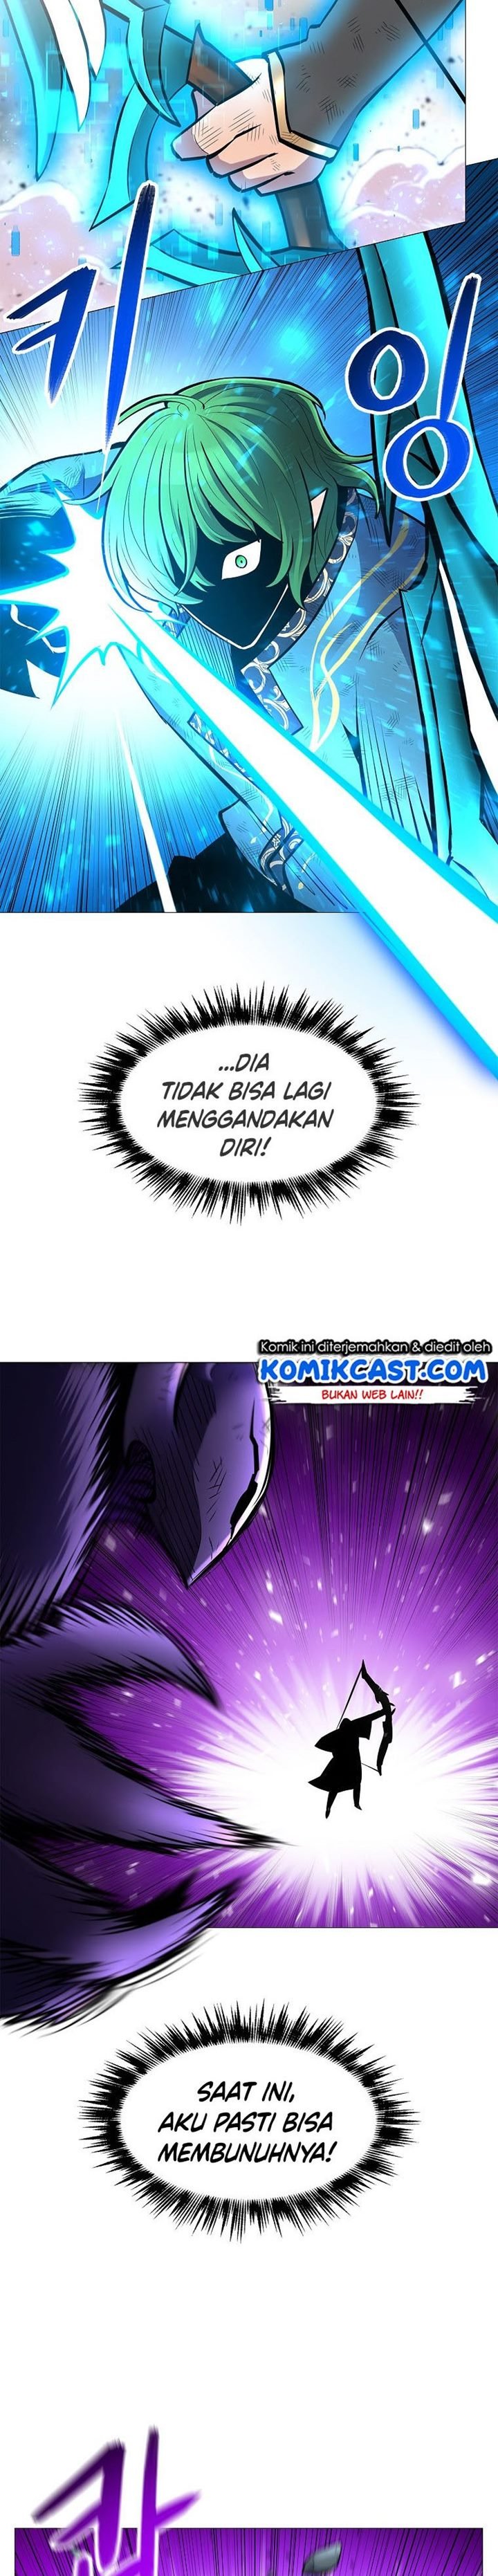 Updater Chapter 79